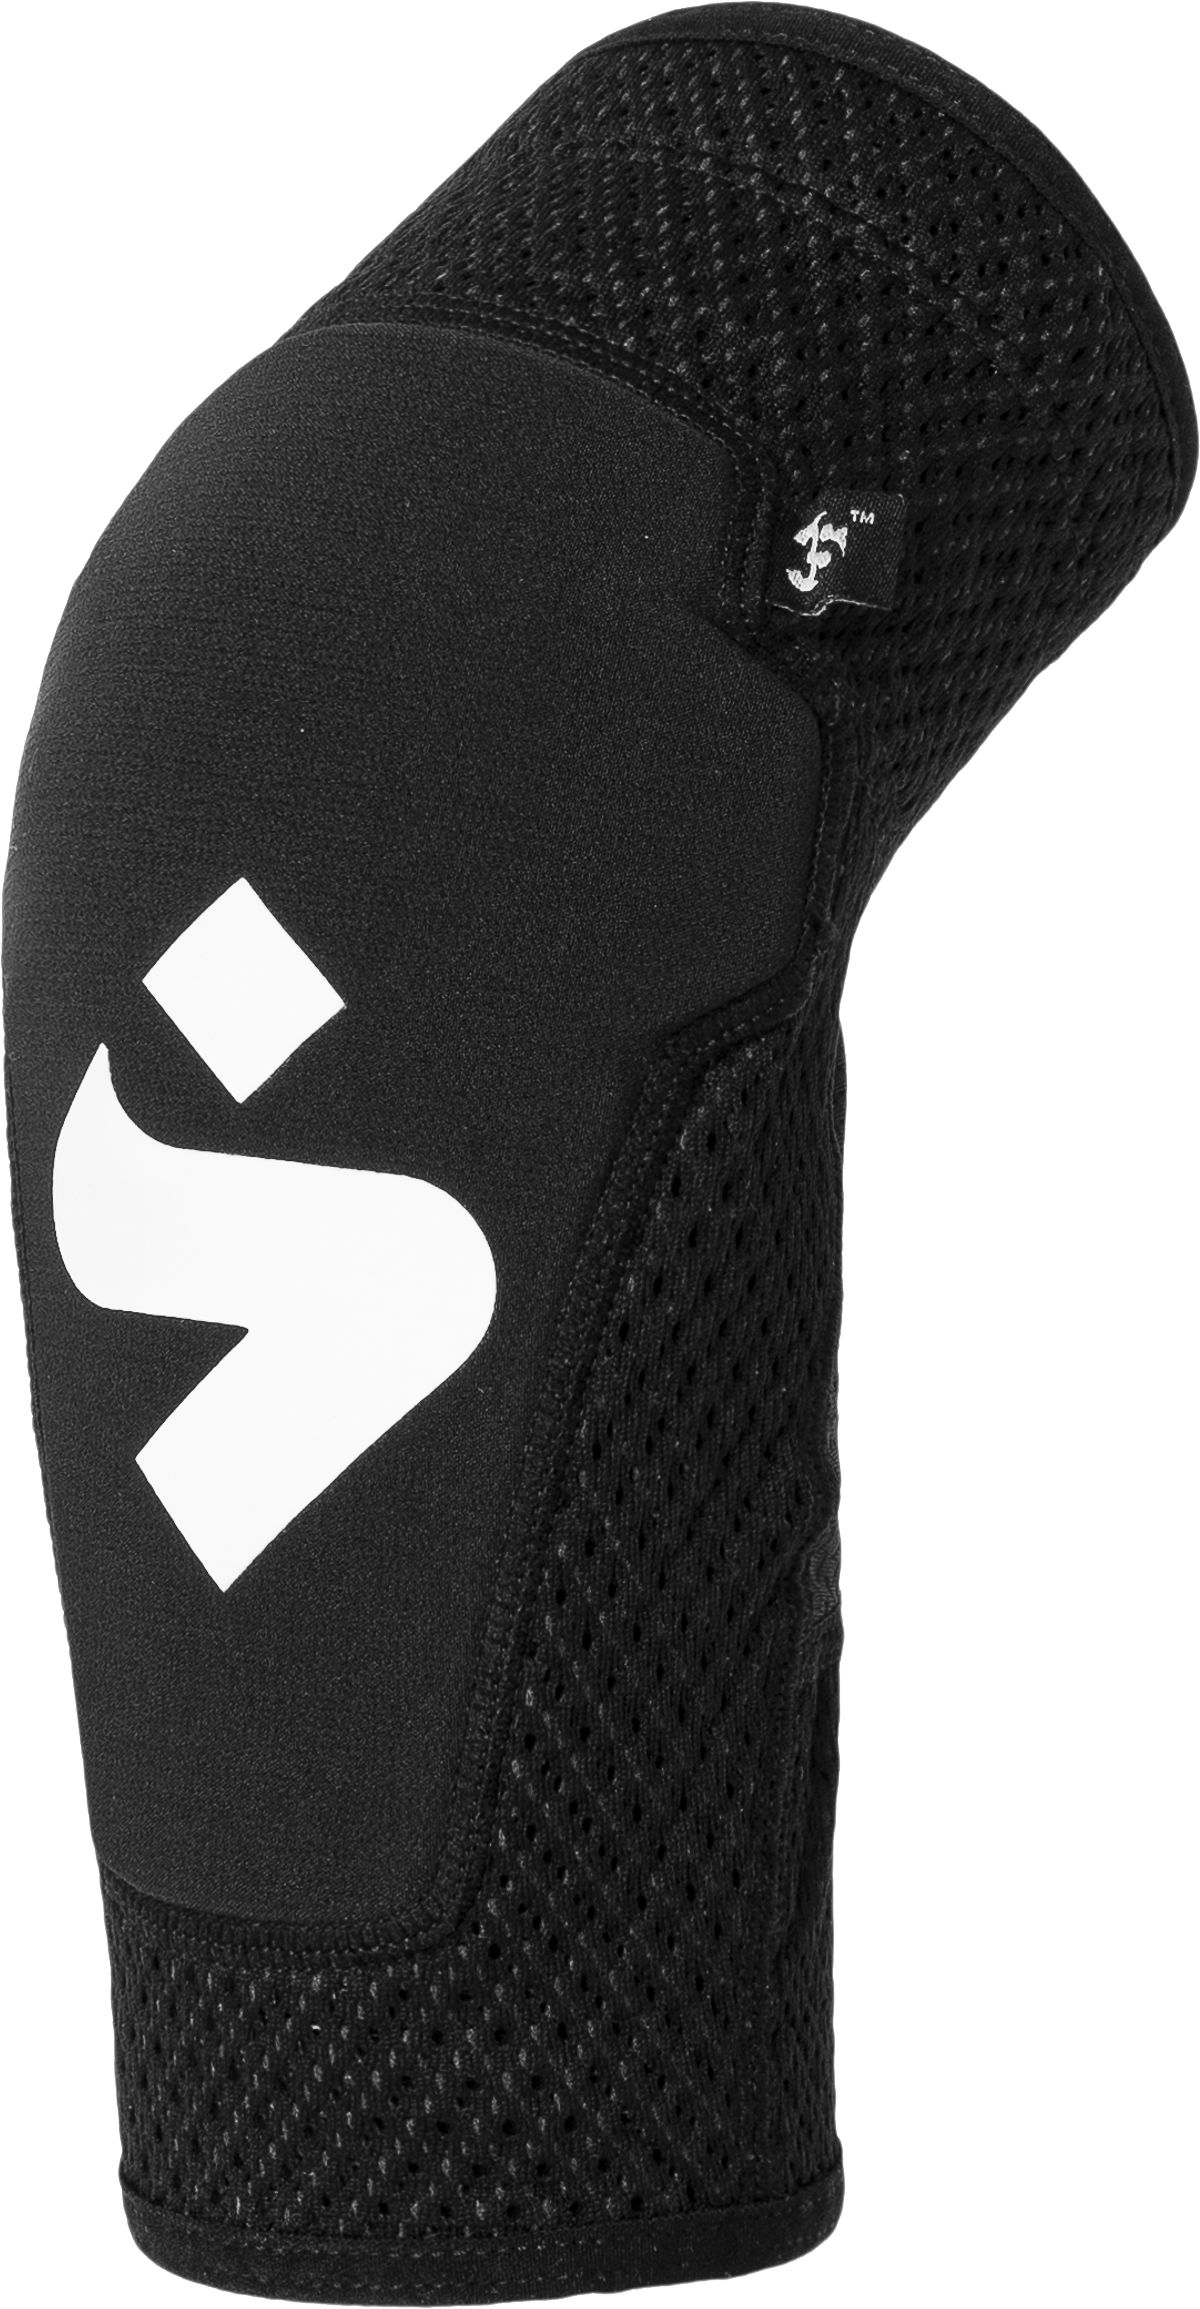 SWEET PROTECTION, Knee Guards Light Jr